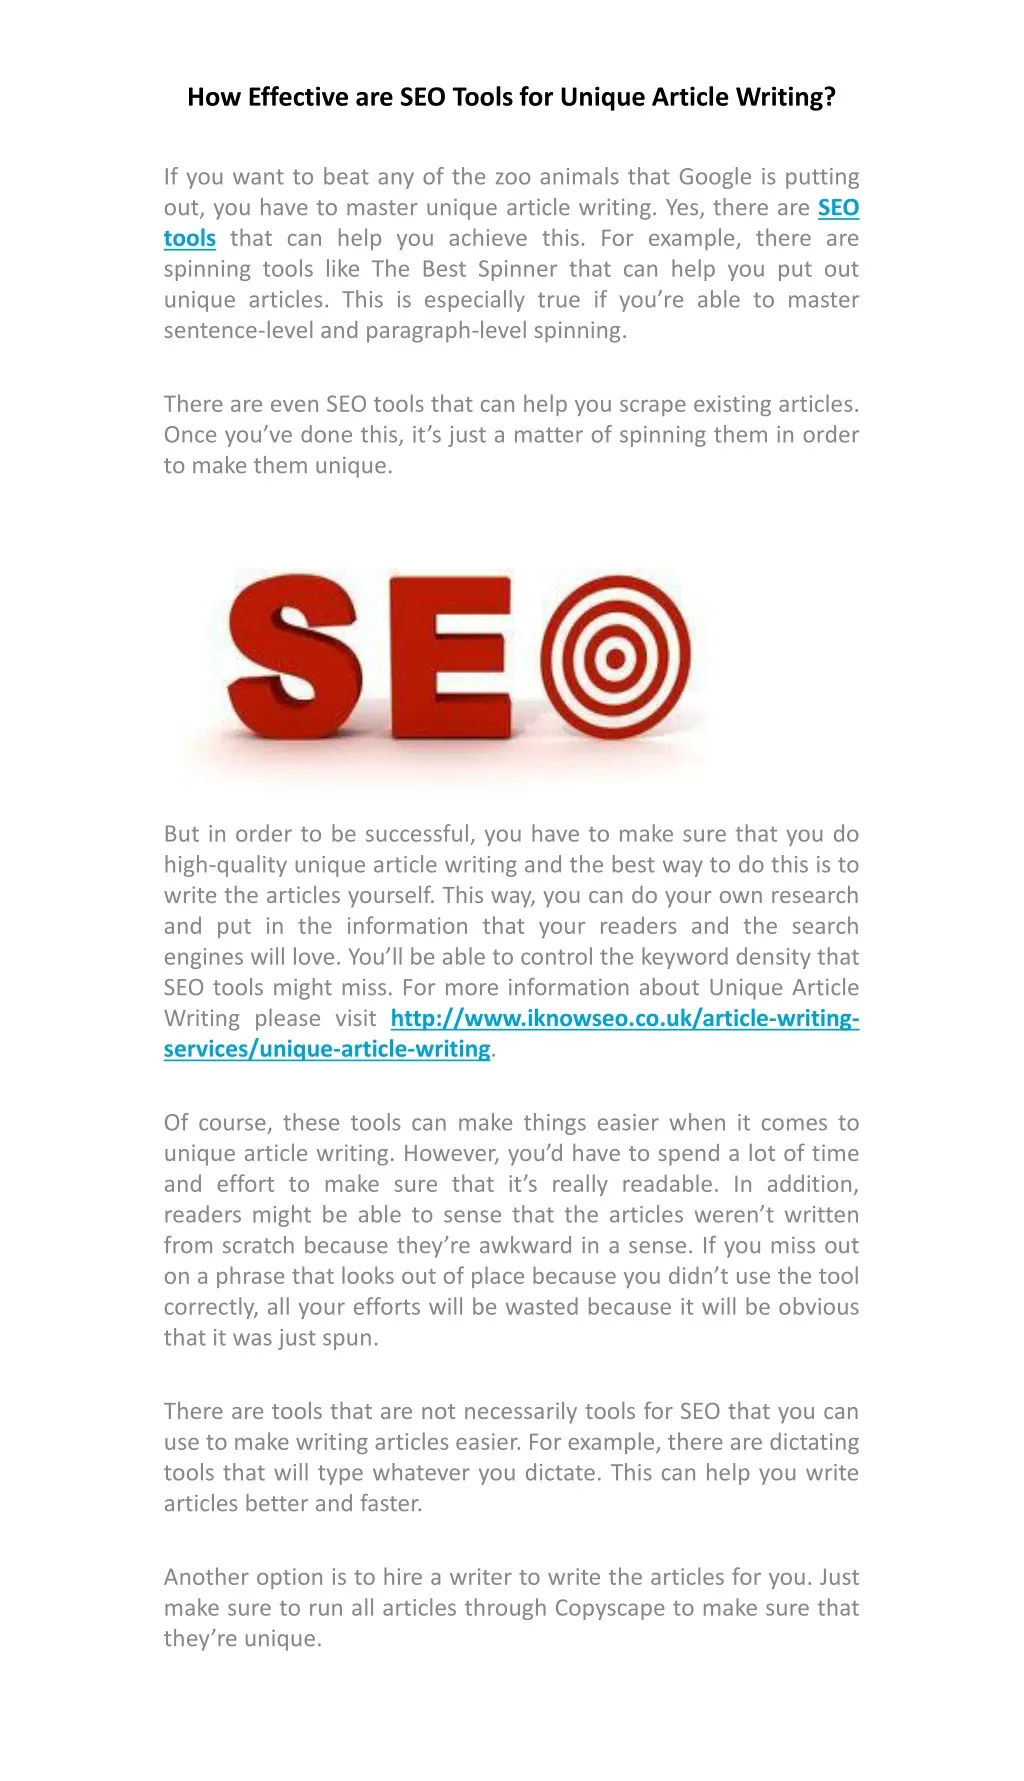 how effective are seo tools for unique article writing